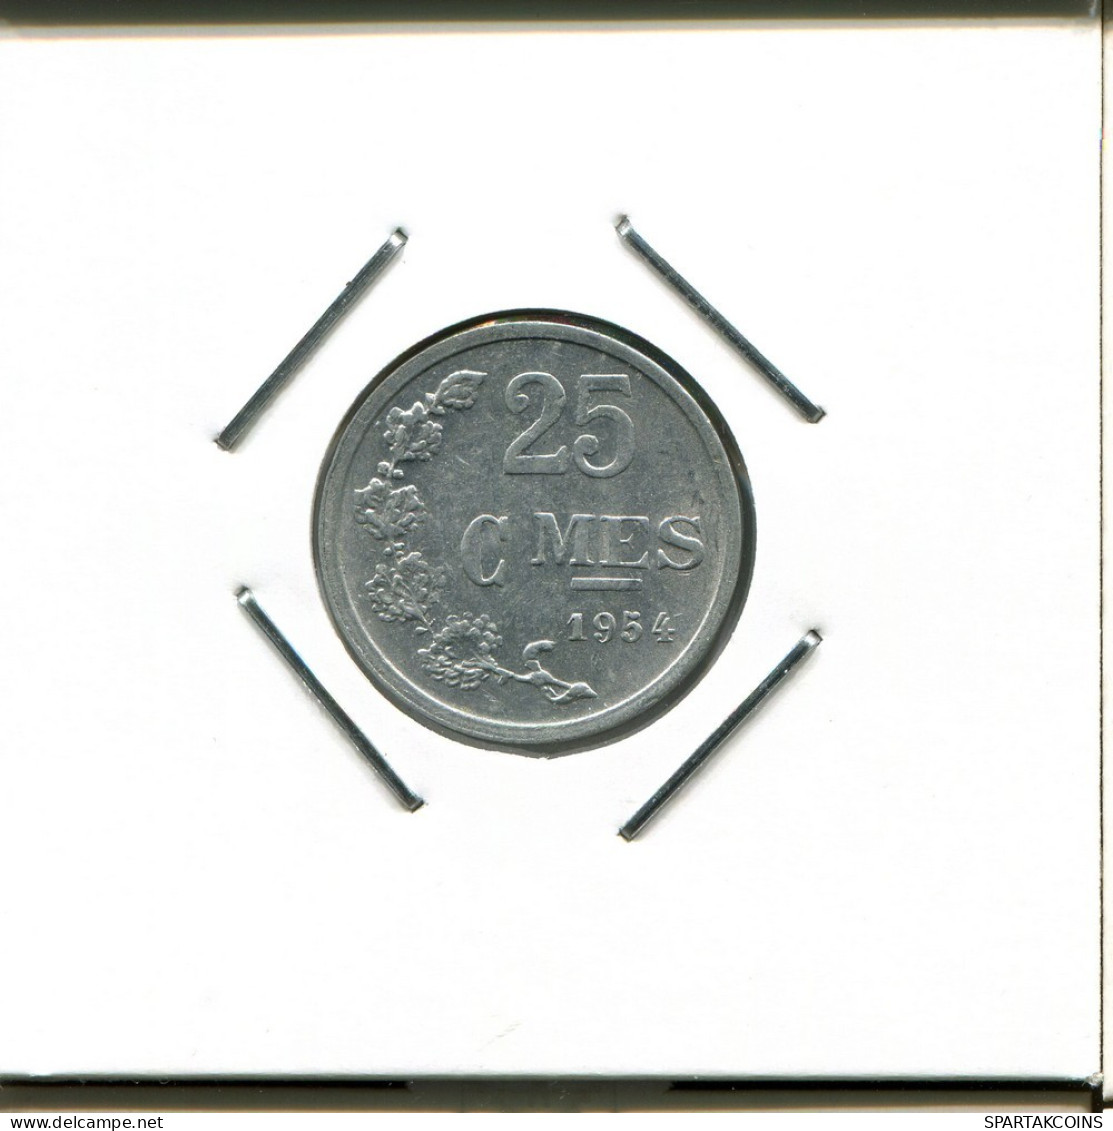 25 CENTIMES 1954 LUXEMBURG LUXEMBOURG Münze #AR680.D.A - Luxembourg